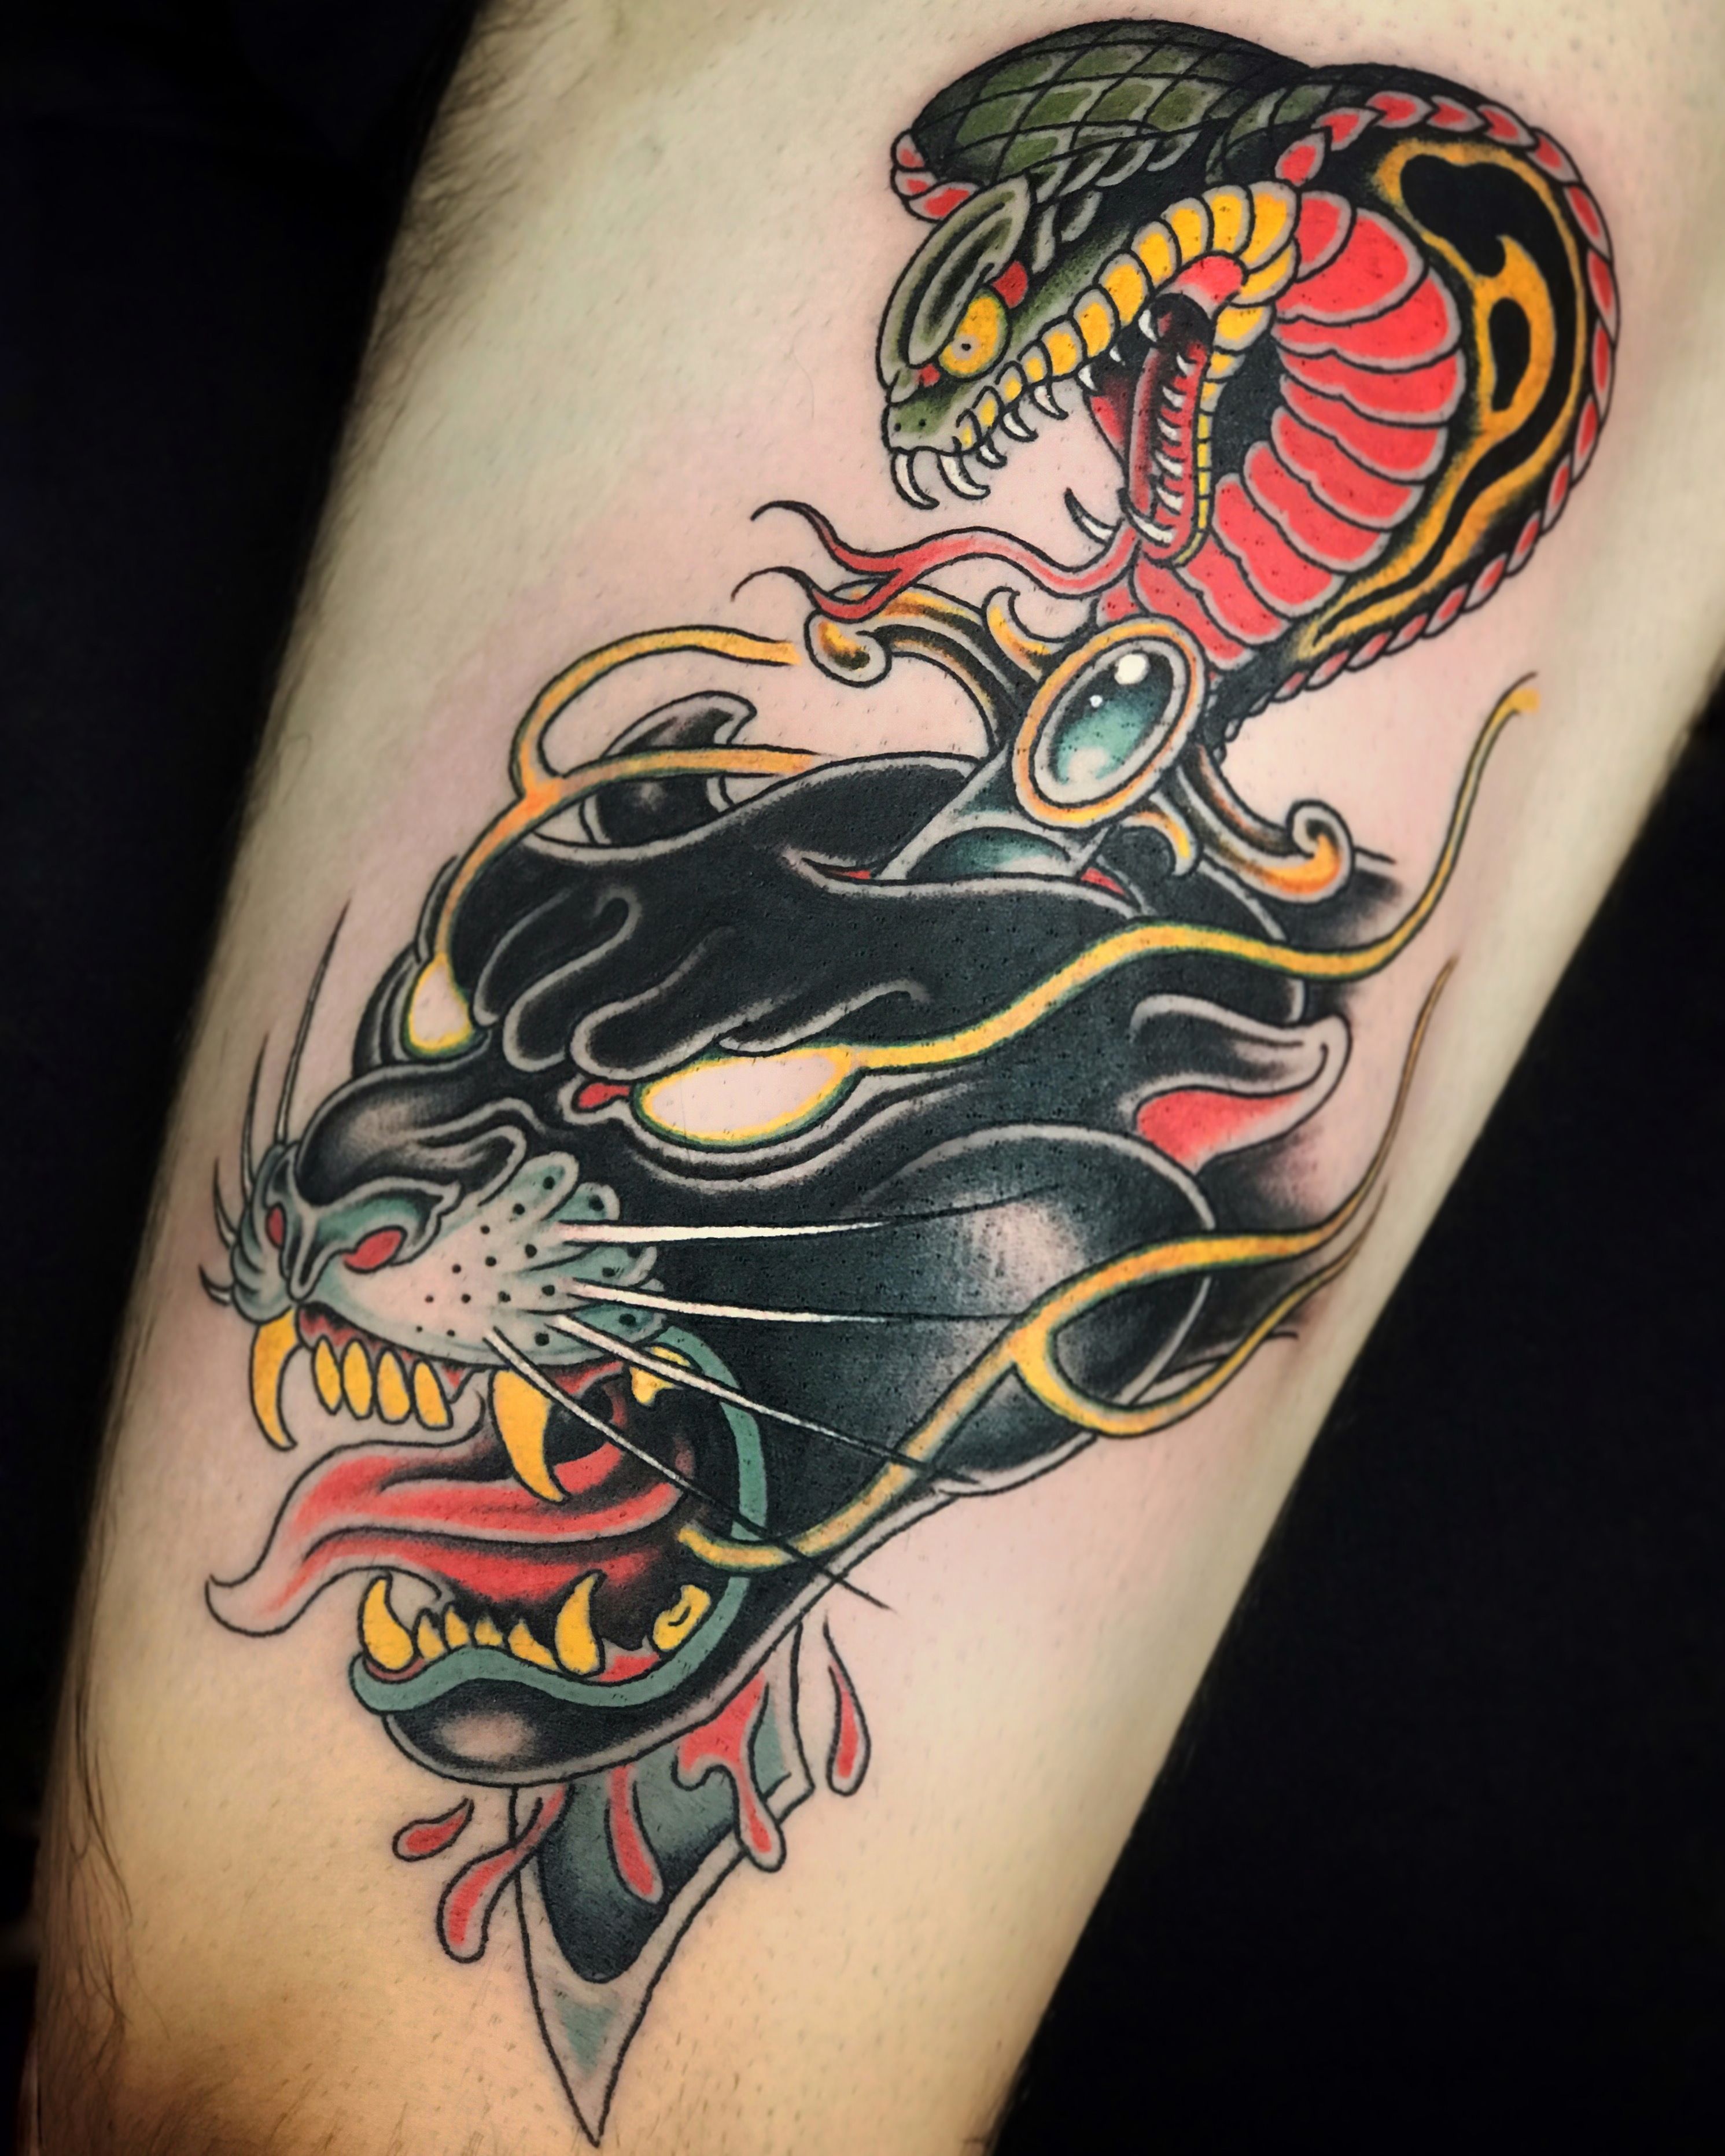 Honest Tattoo  Healed panther and fresh cobra and hannya chest piece in  progress by nikodemustattoos honesttattoo athens psirri  traditionaltattoos cobra hannya panther chestpiecetattoo  Facebook